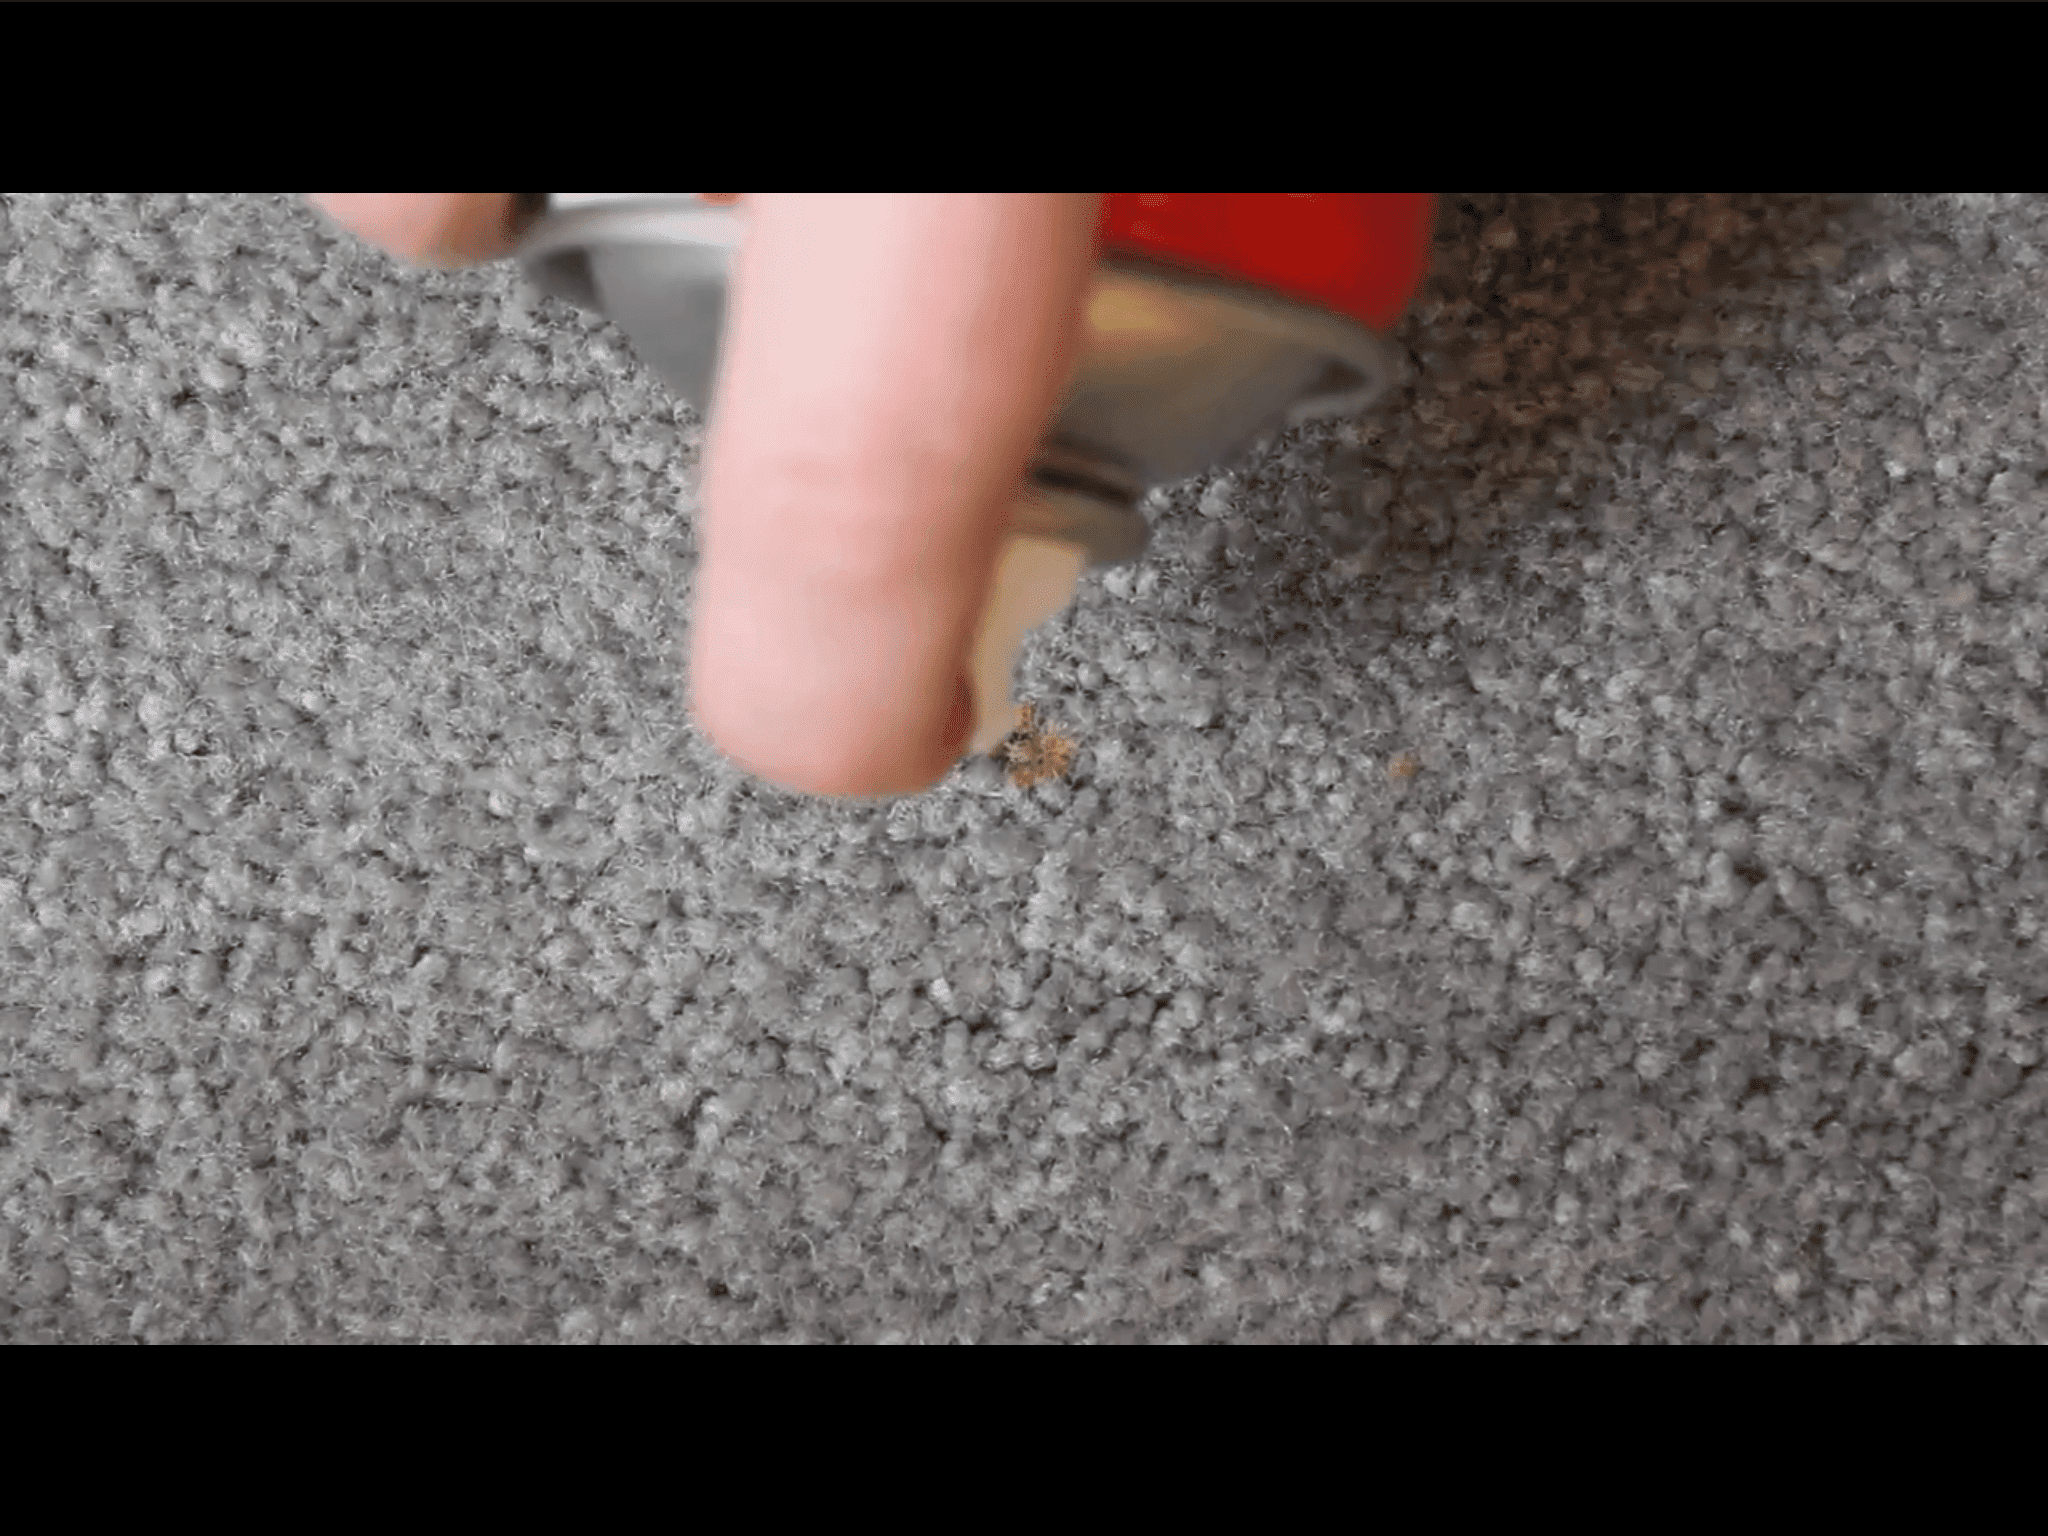 removing carpet stains in car